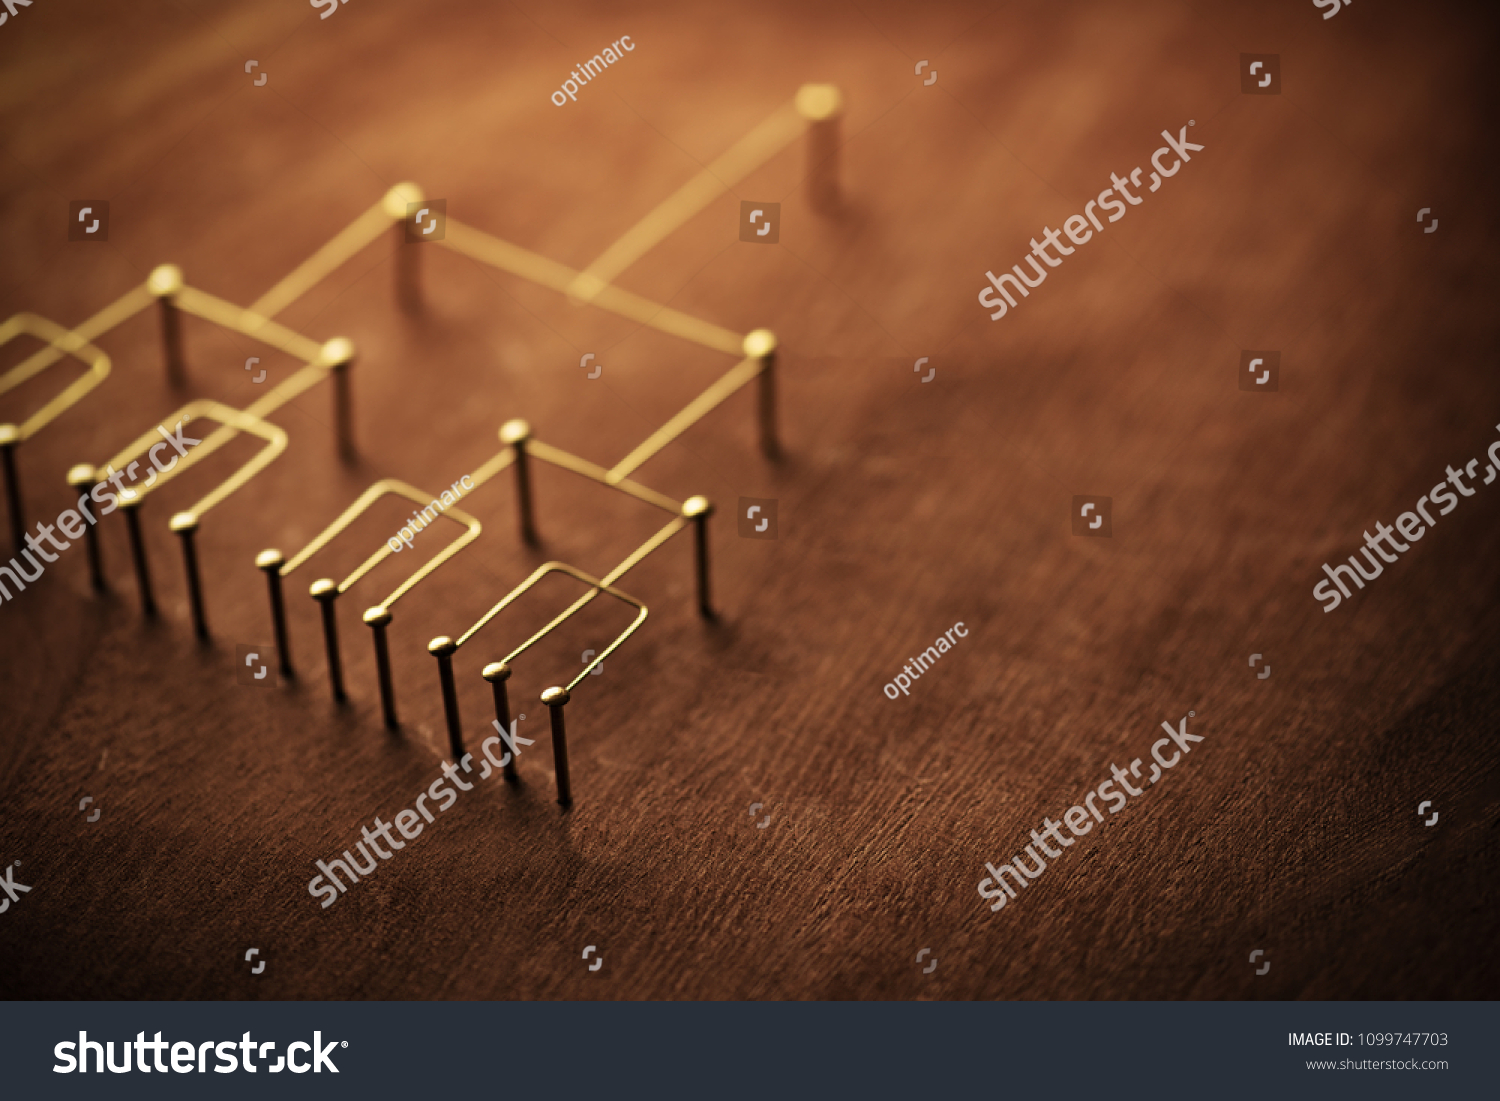 Hierarchy, command chain, company / organization structure or layer and grouping concept image. Top down structure made from gold wires and nails on rustic wooden surface. Shallow depth of field. #1099747703